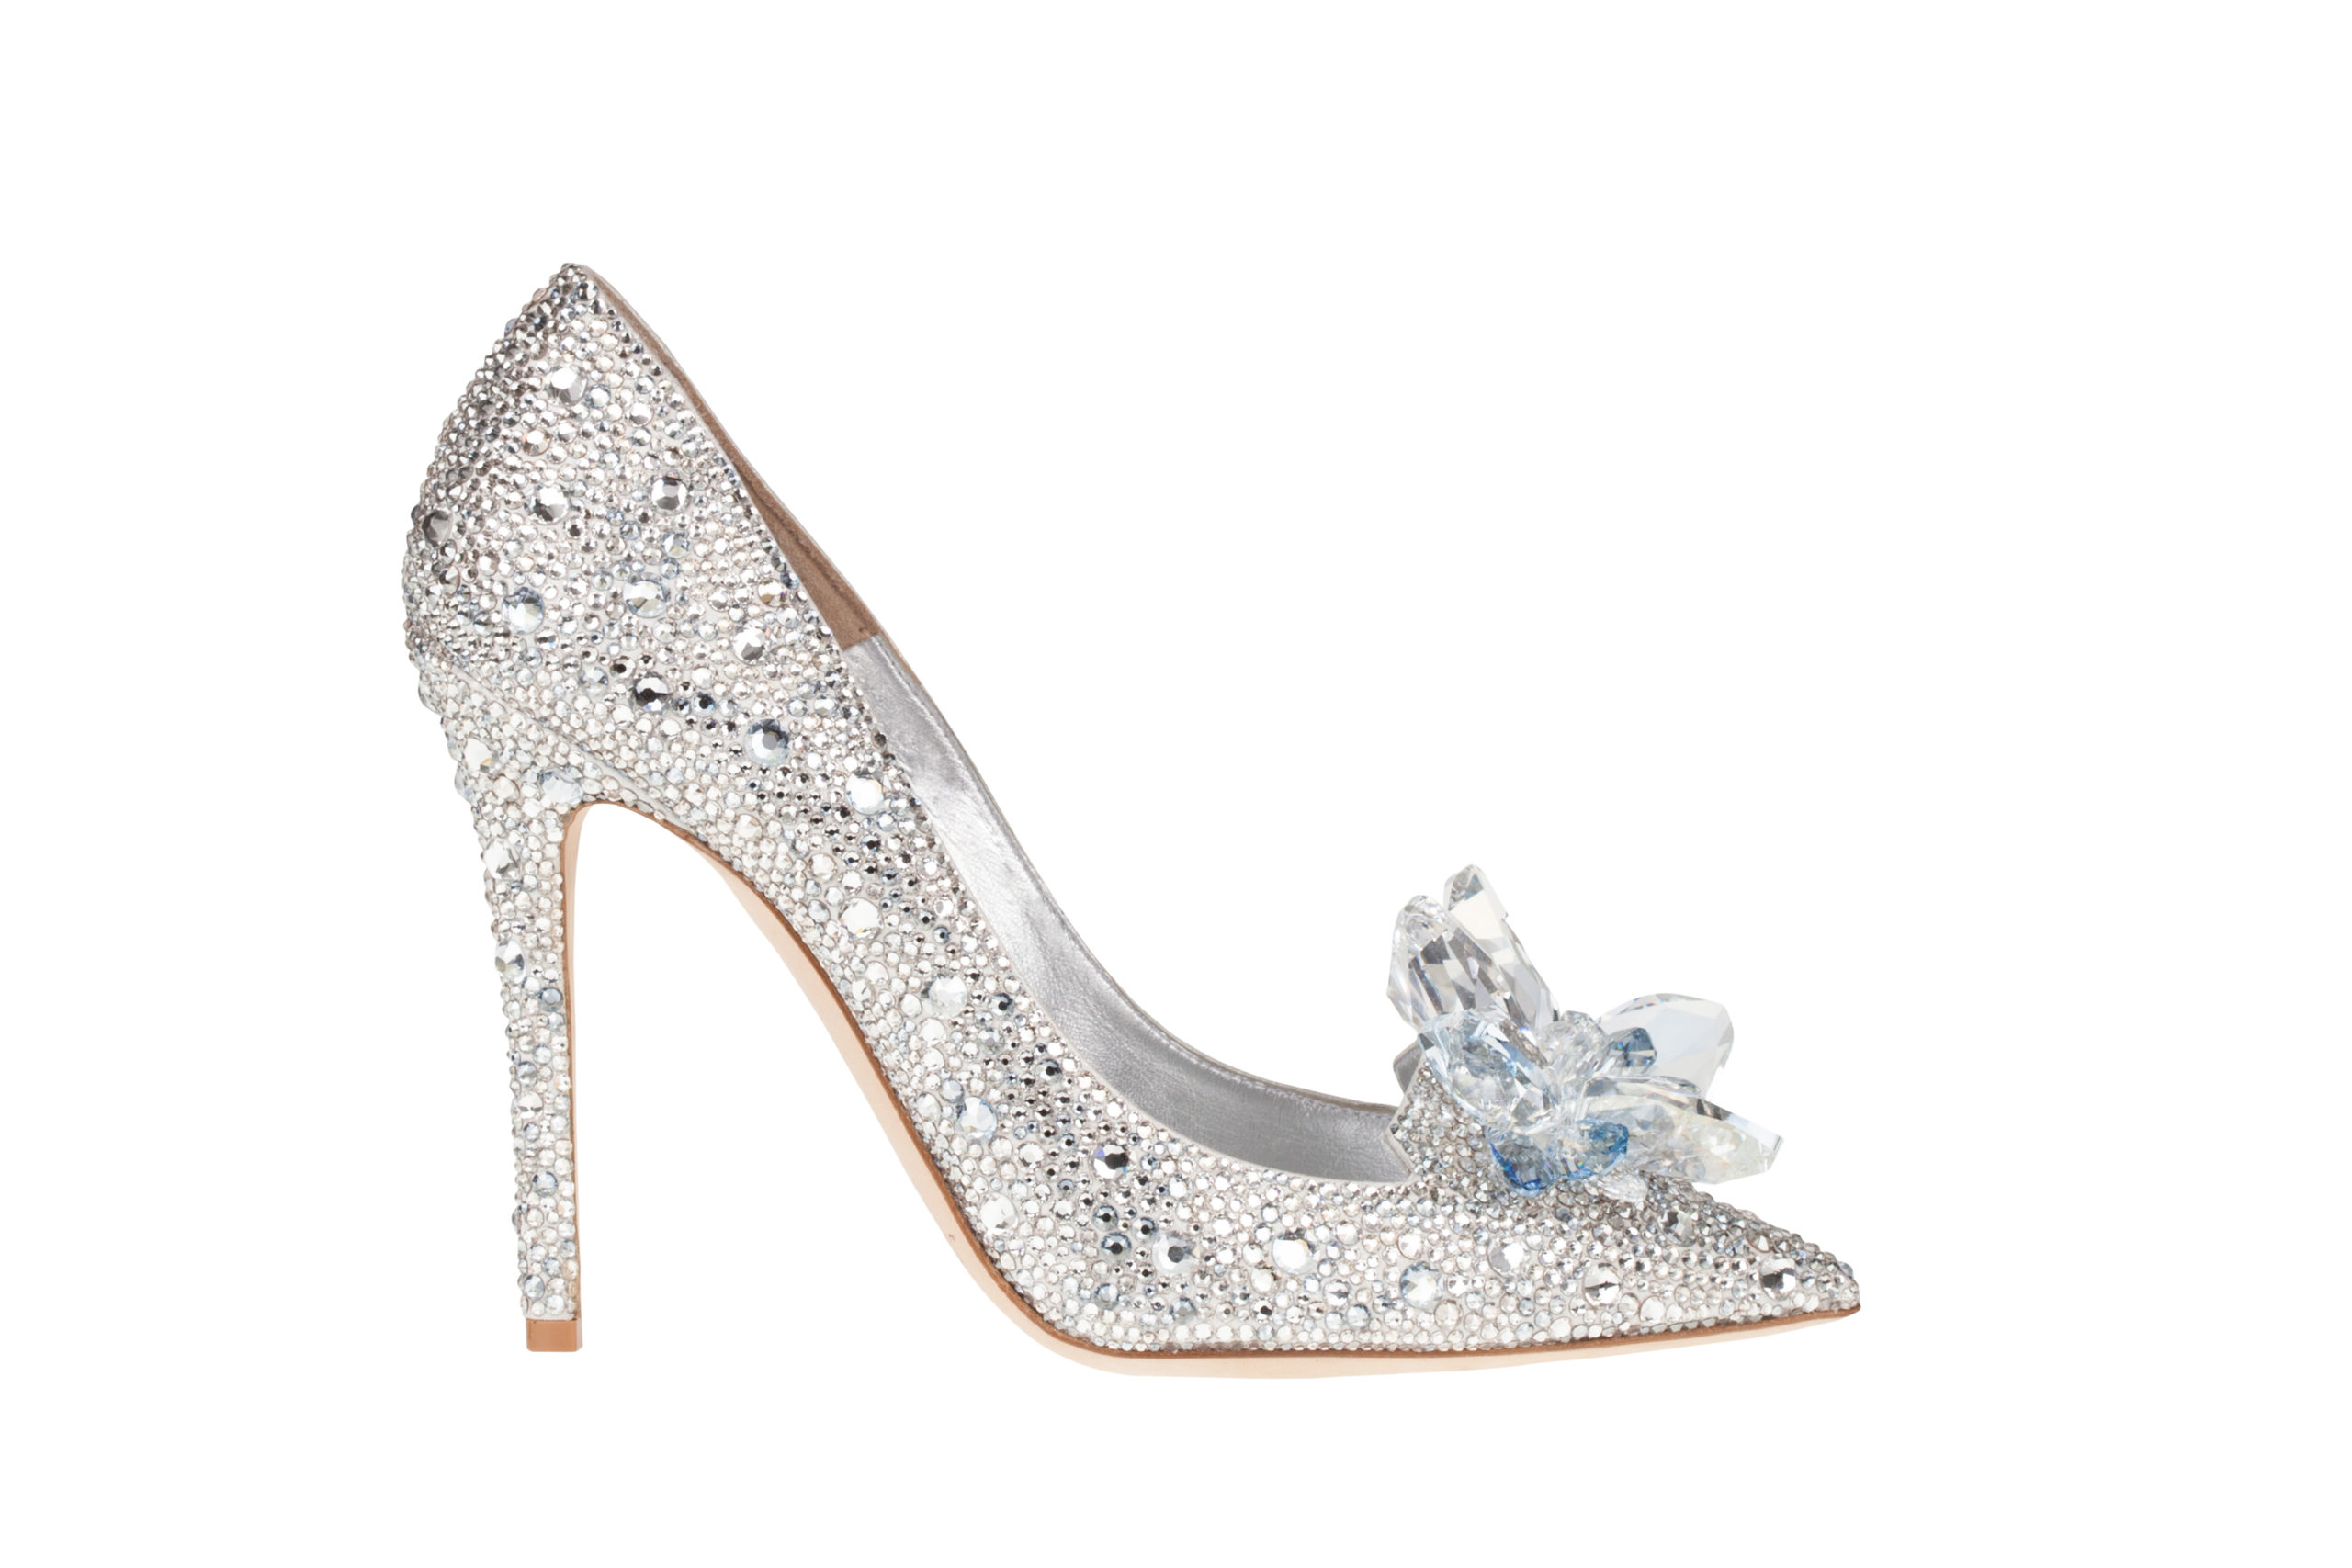 Jimmy Choo, Creative Director Sandra Choi: “I think every girl desires a Cinderella moment in their lives. This story ignites a love affair and fascination with shoes that never dies. The power they have to transform is instilled from a young age and the fantasy remains alive forever. I wanted to create a shoe that felt magical, with alluring sparkle and a feminine, timeless silhouette evoking those childhood emotions.”